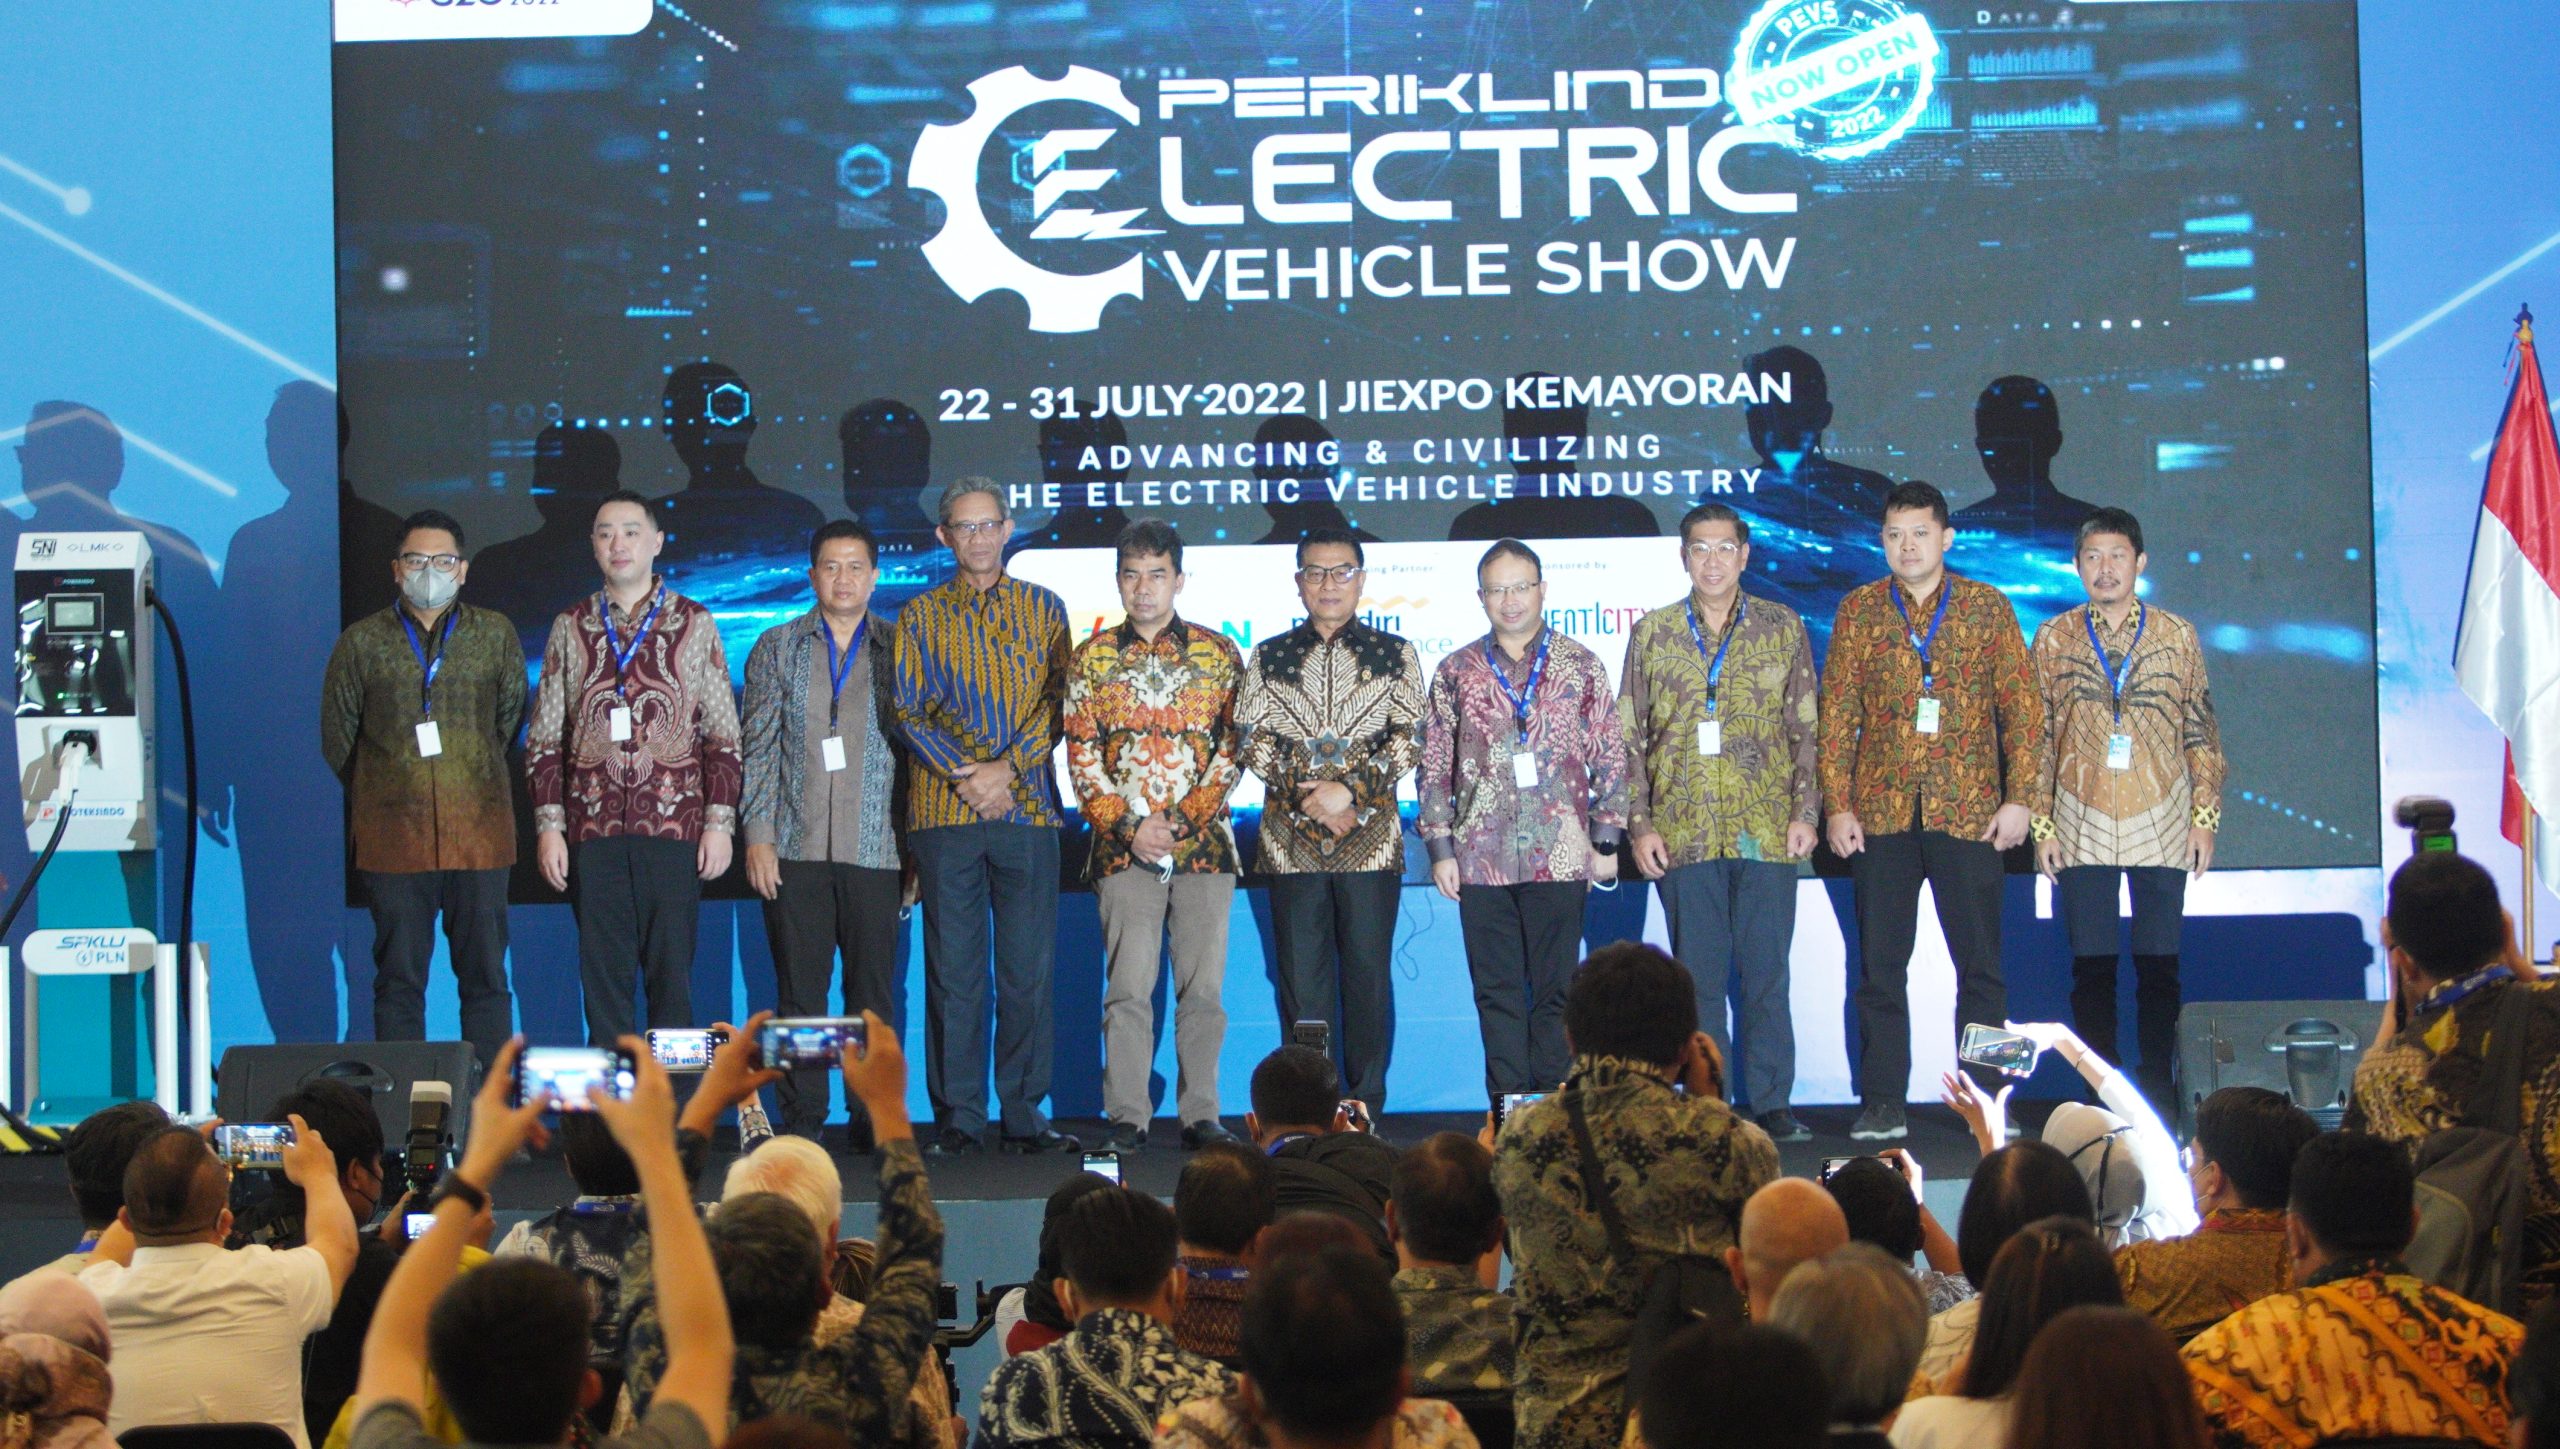 OPENING CEREMONY PERIKLINDO ELECTRIC VEHICLE SHOW 2022